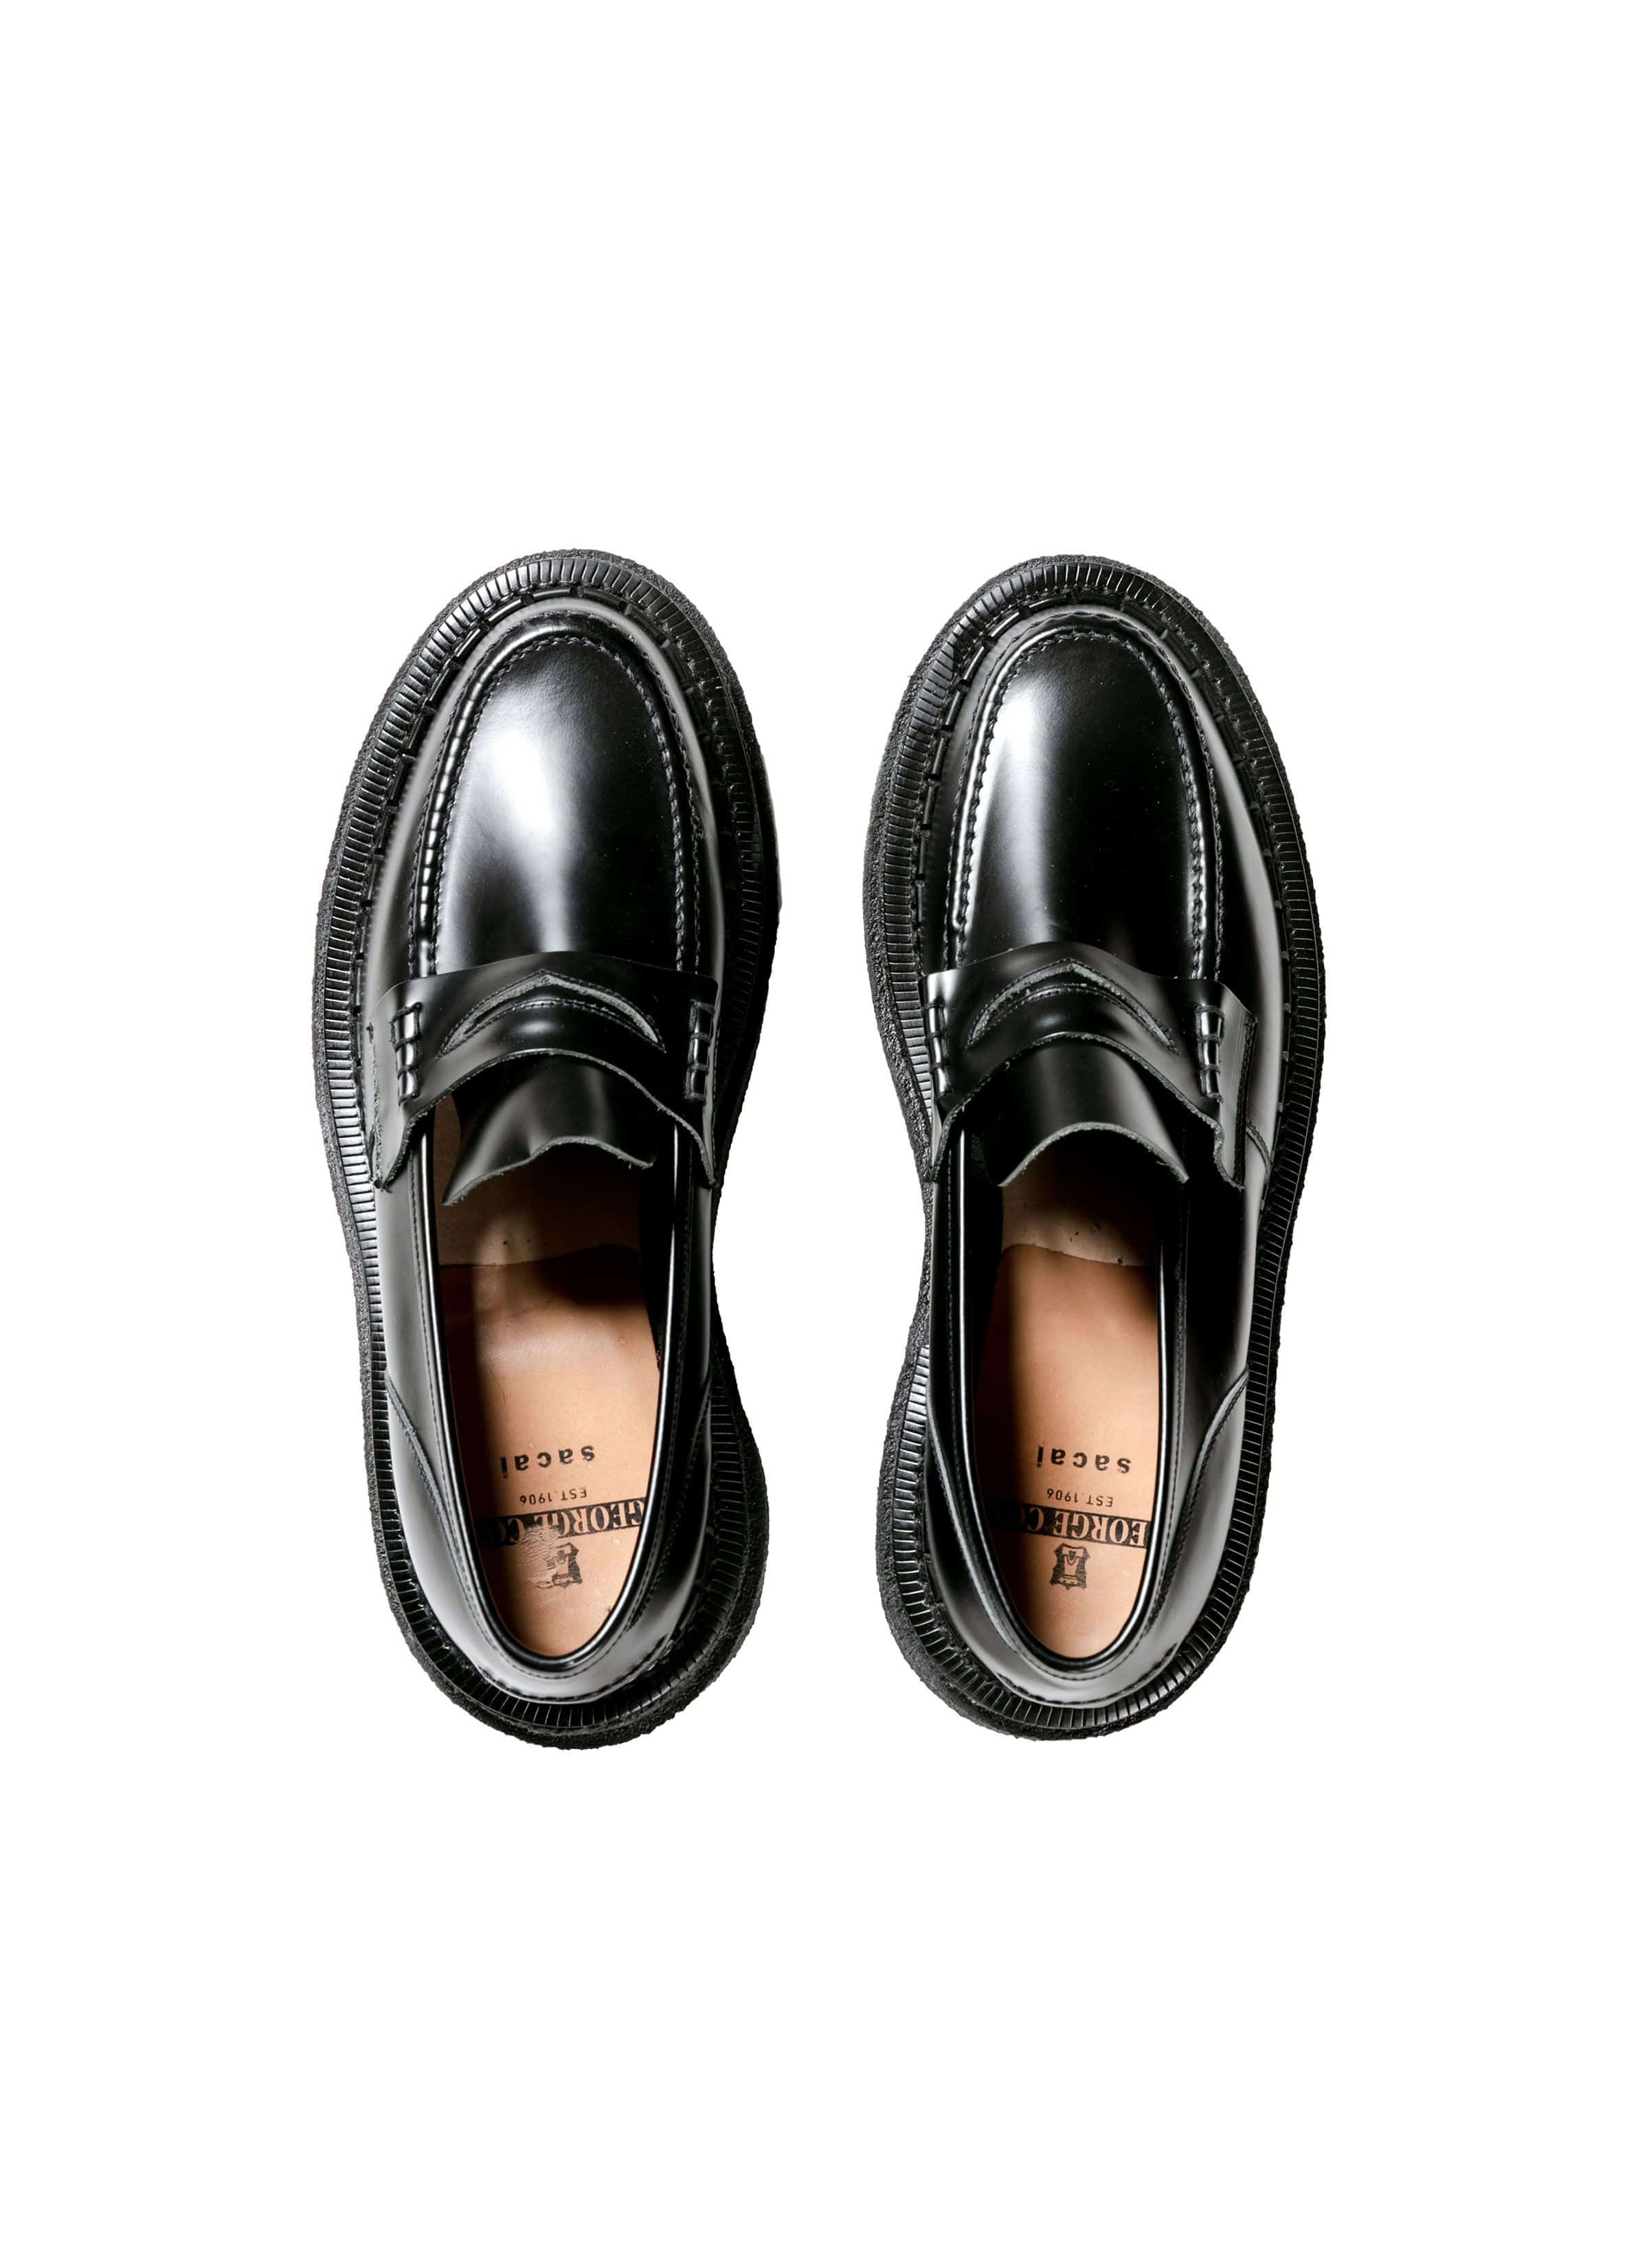 sacai x George Cox / Double Sole Coin Loafer 詳細画像 BLACK 3